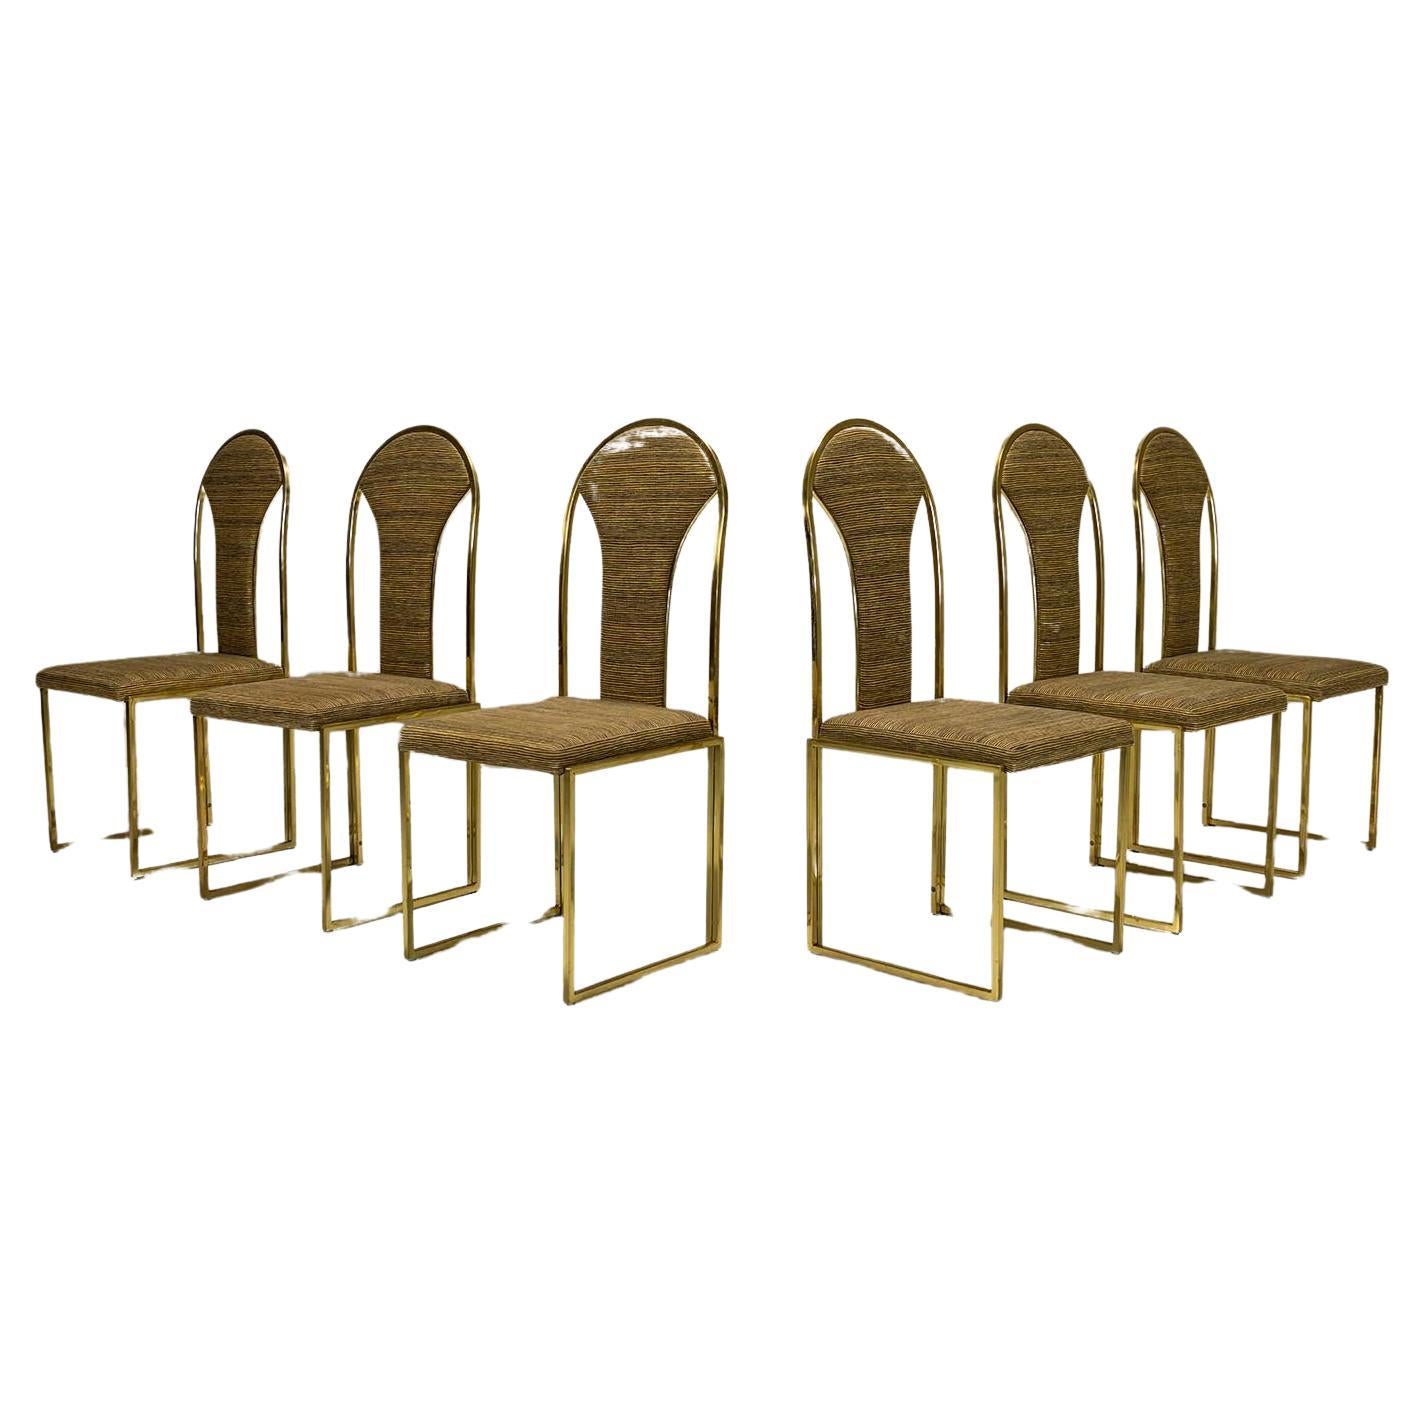 Six Hollywood Regency Dining Chairs Manufactured By Belgo Chrom, Belgium 1970's For Sale